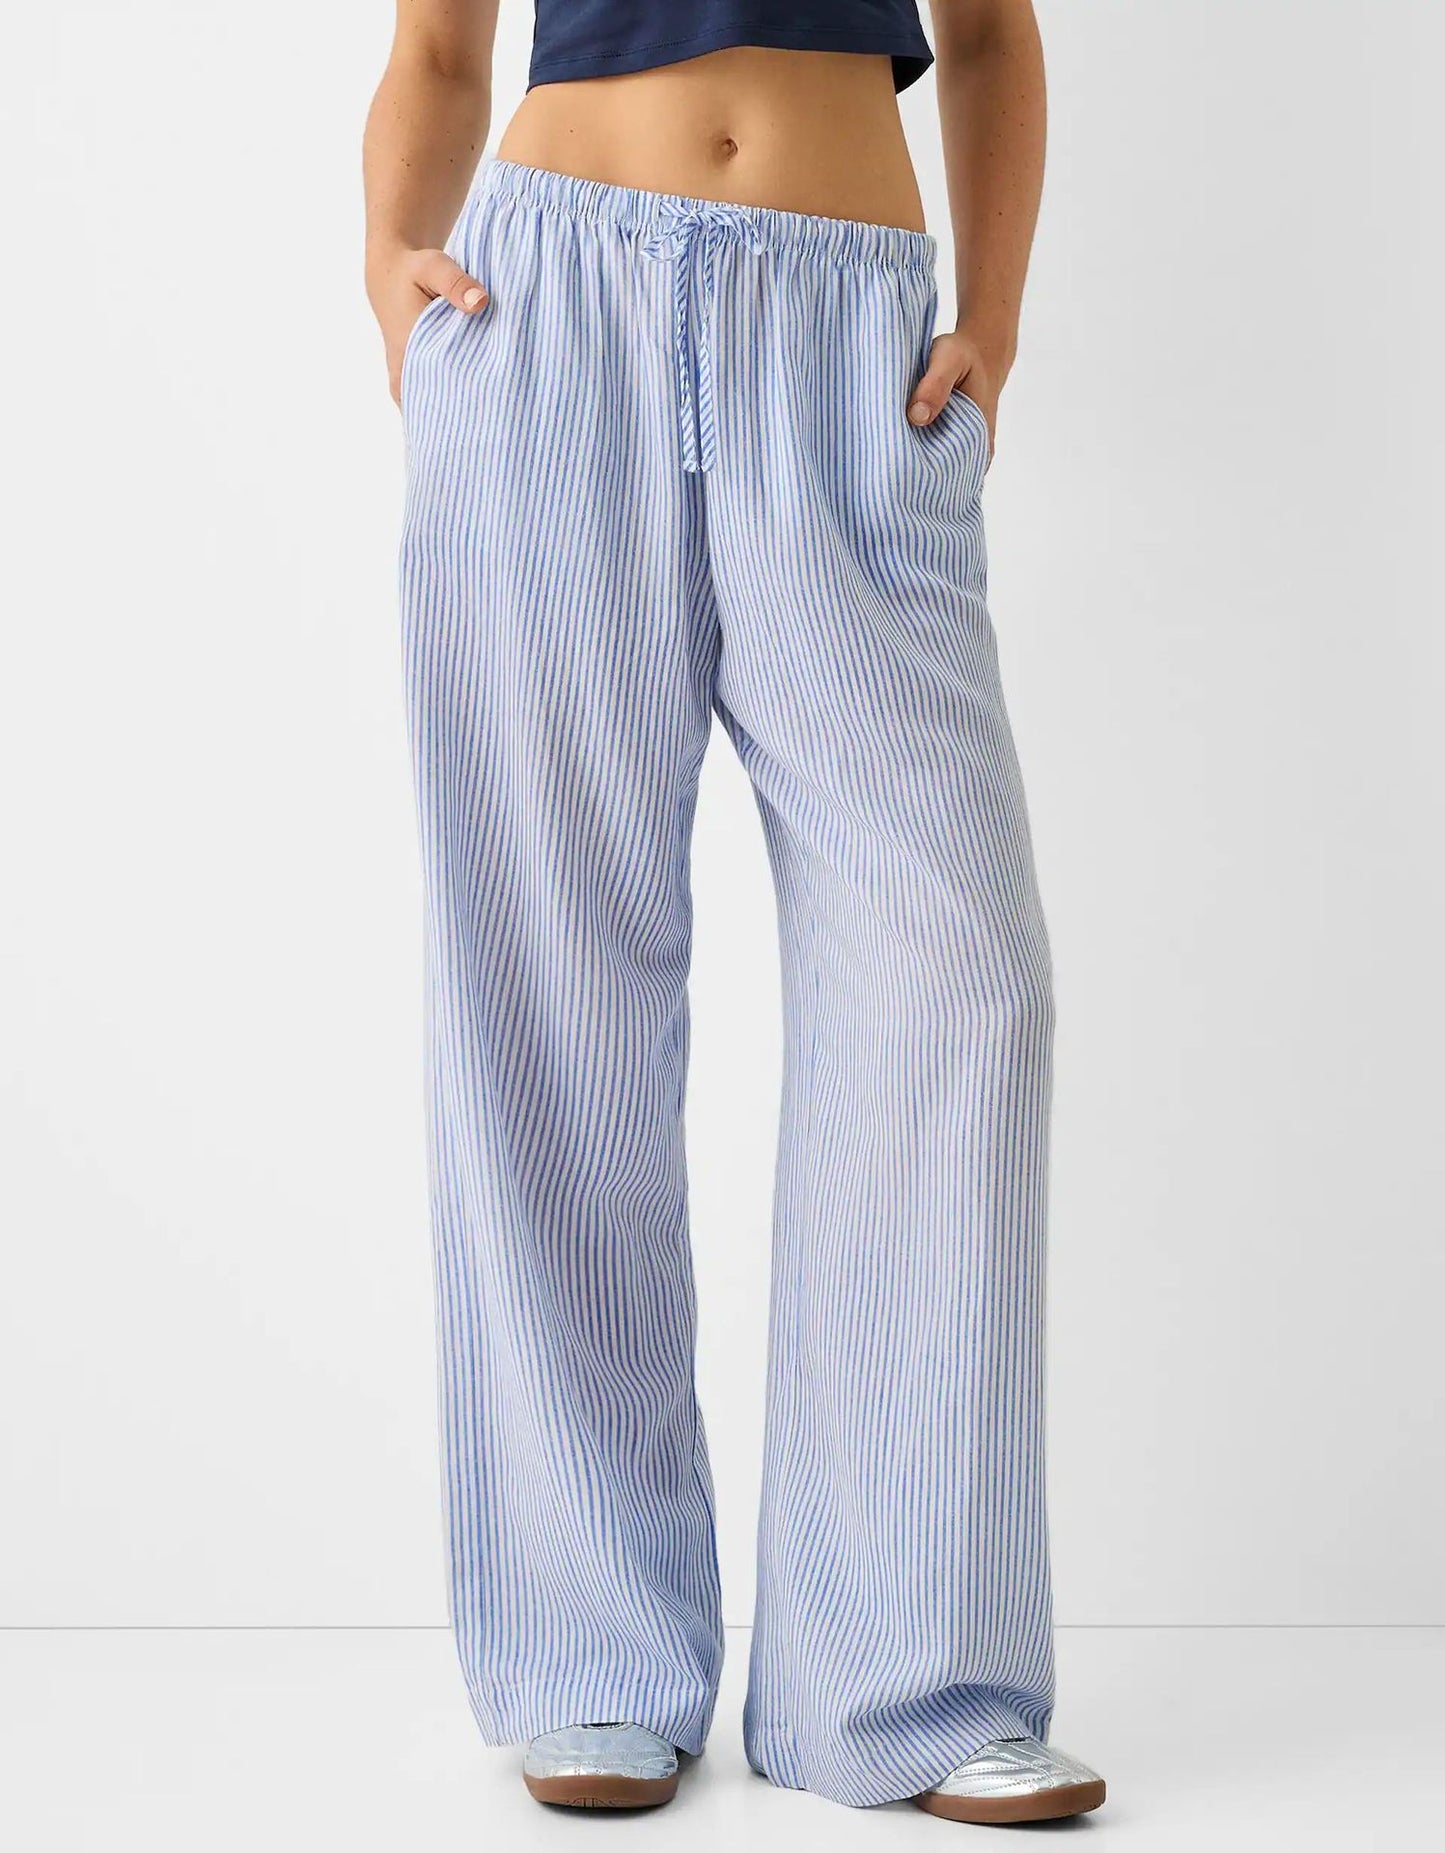 Comfortable Pinstripe Casual Loose Trousers with Elastic Waist for Women